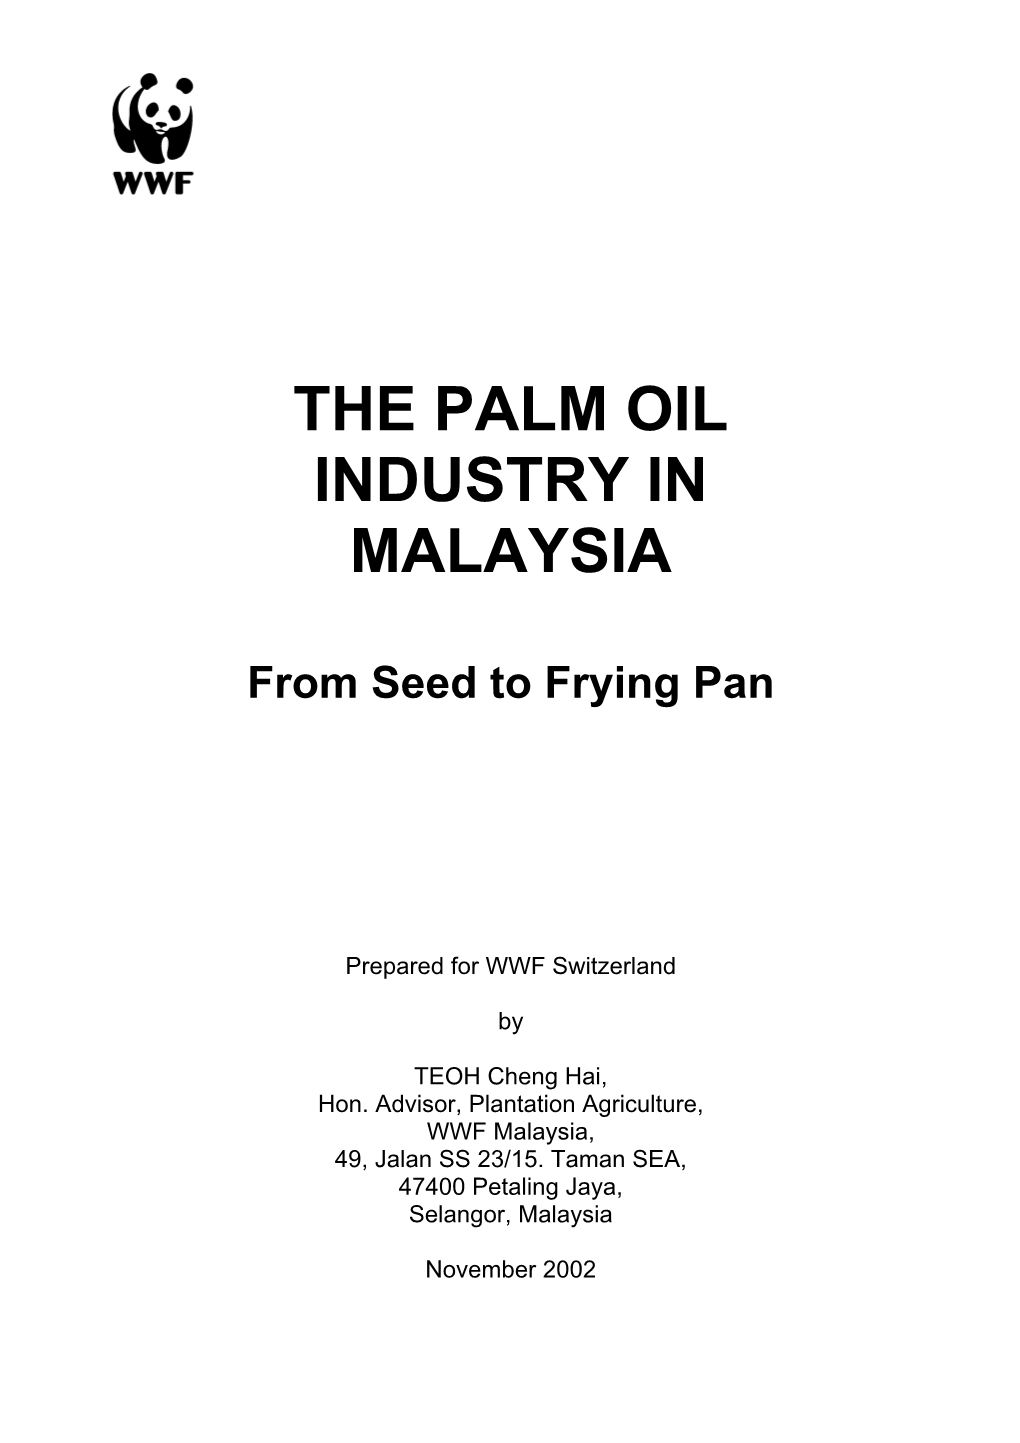 The Palm Oil Industry in Malaysia